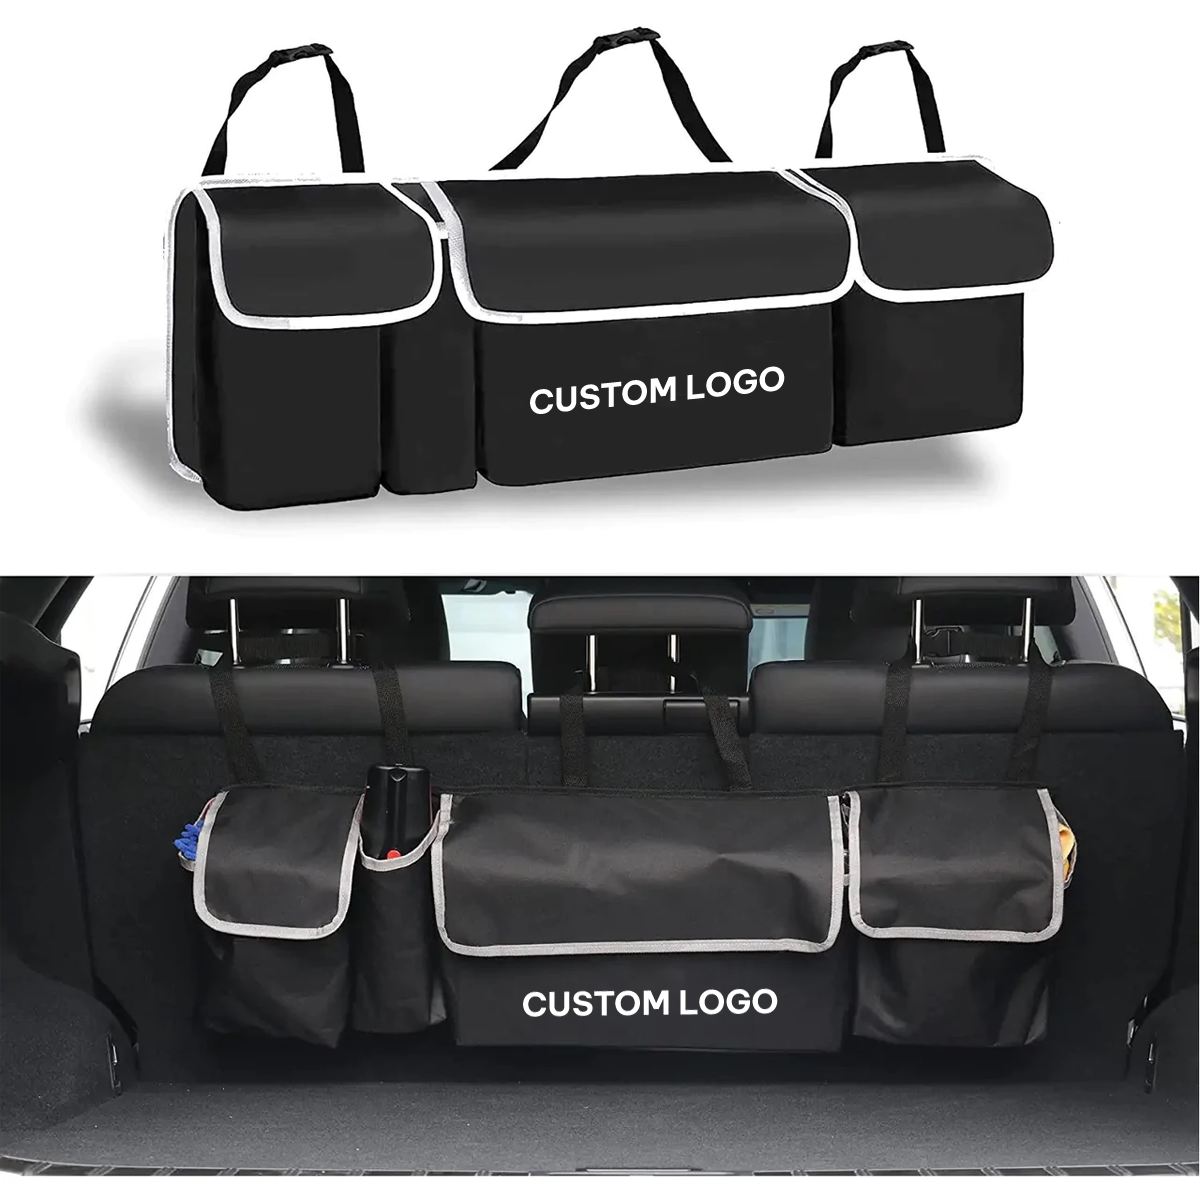 Car Trunk Hanging Organizer, Car Trunk Hanging Organizer, Thick Backseat Trunk Storage Bag with 4 Pockets and 3 Adjustable Shoulder Straps, Foldable Car Trunk Interior Accessories Releases Your Trunk Space